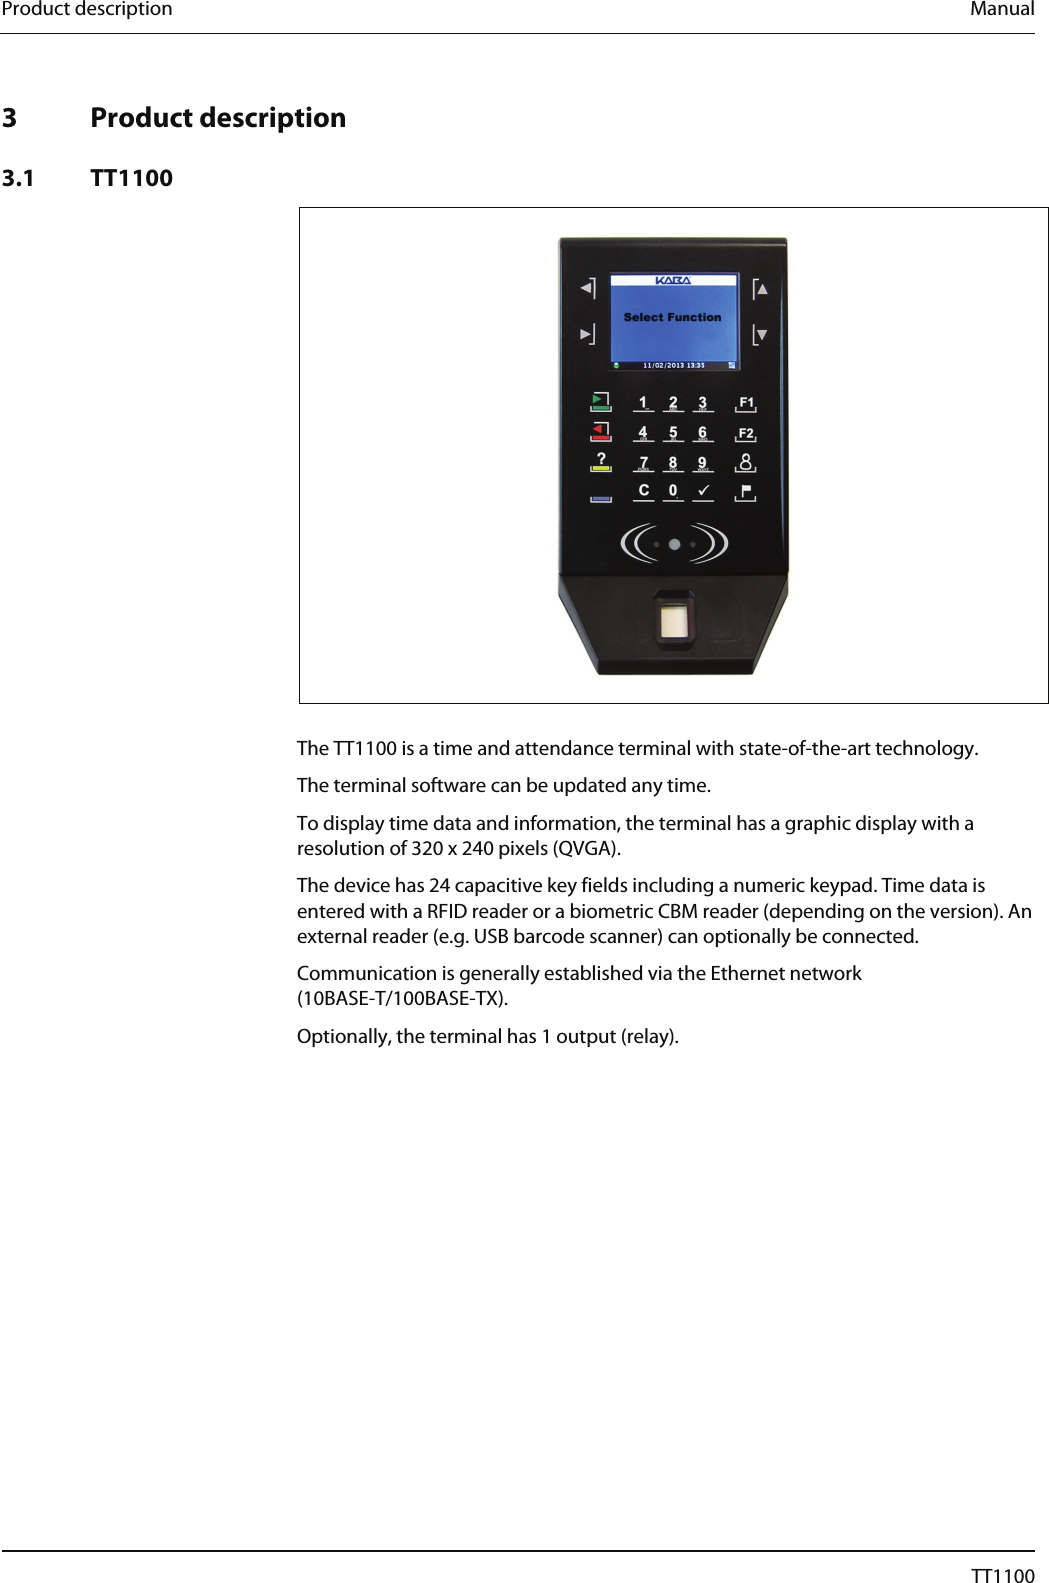 Product description  Manual   3 Product description  3.1 TT1100    The TT1100 is a time and attendance terminal with state-of-the-art technology.  The terminal software can be updated any time. To display time data and information, the terminal has a graphic display with a resolution of 320 x 240 pixels (QVGA). The device has 24 capacitive key fields including a numeric keypad. Time data is entered with a RFID reader or a biometric CBM reader (depending on the version). An external reader (e.g. USB barcode scanner) can optionally be connected. Communication is generally established via the Ethernet network (10BASE-T/100BASE-TX).  Optionally, the terminal has 1 output (relay). 10  04044239 - 08/2013  TT1100 